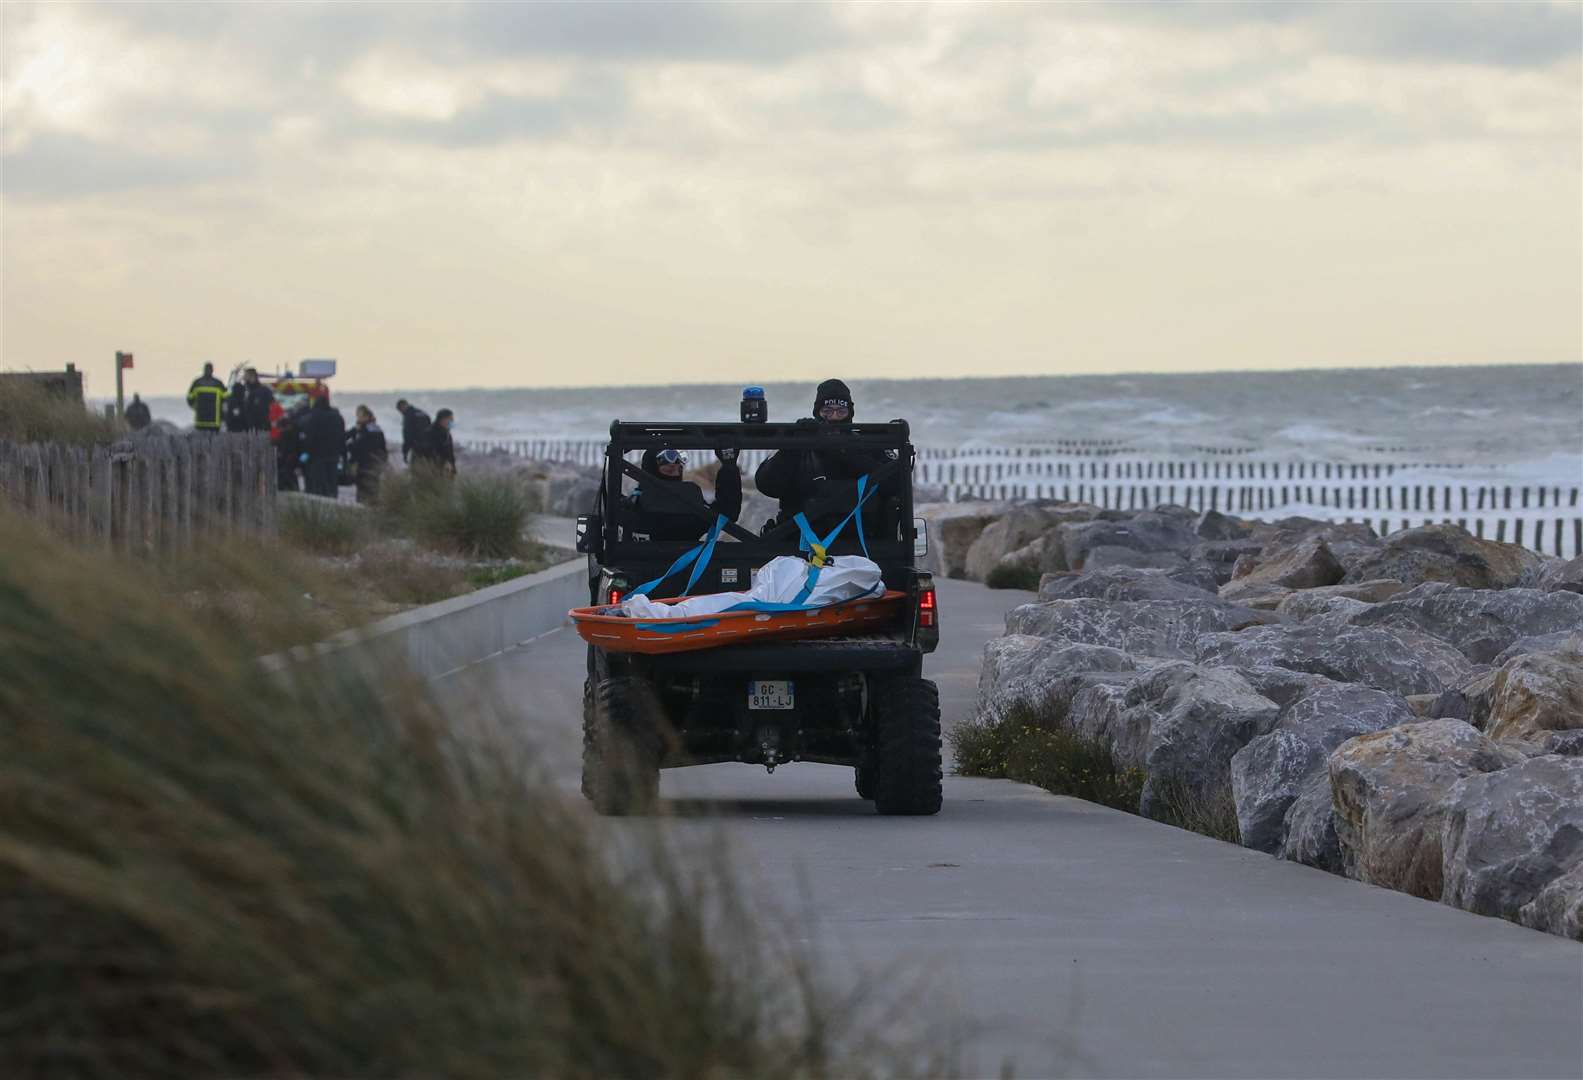 The body of an asylum seeker is recovered from a beach in France Picture: UKNIP